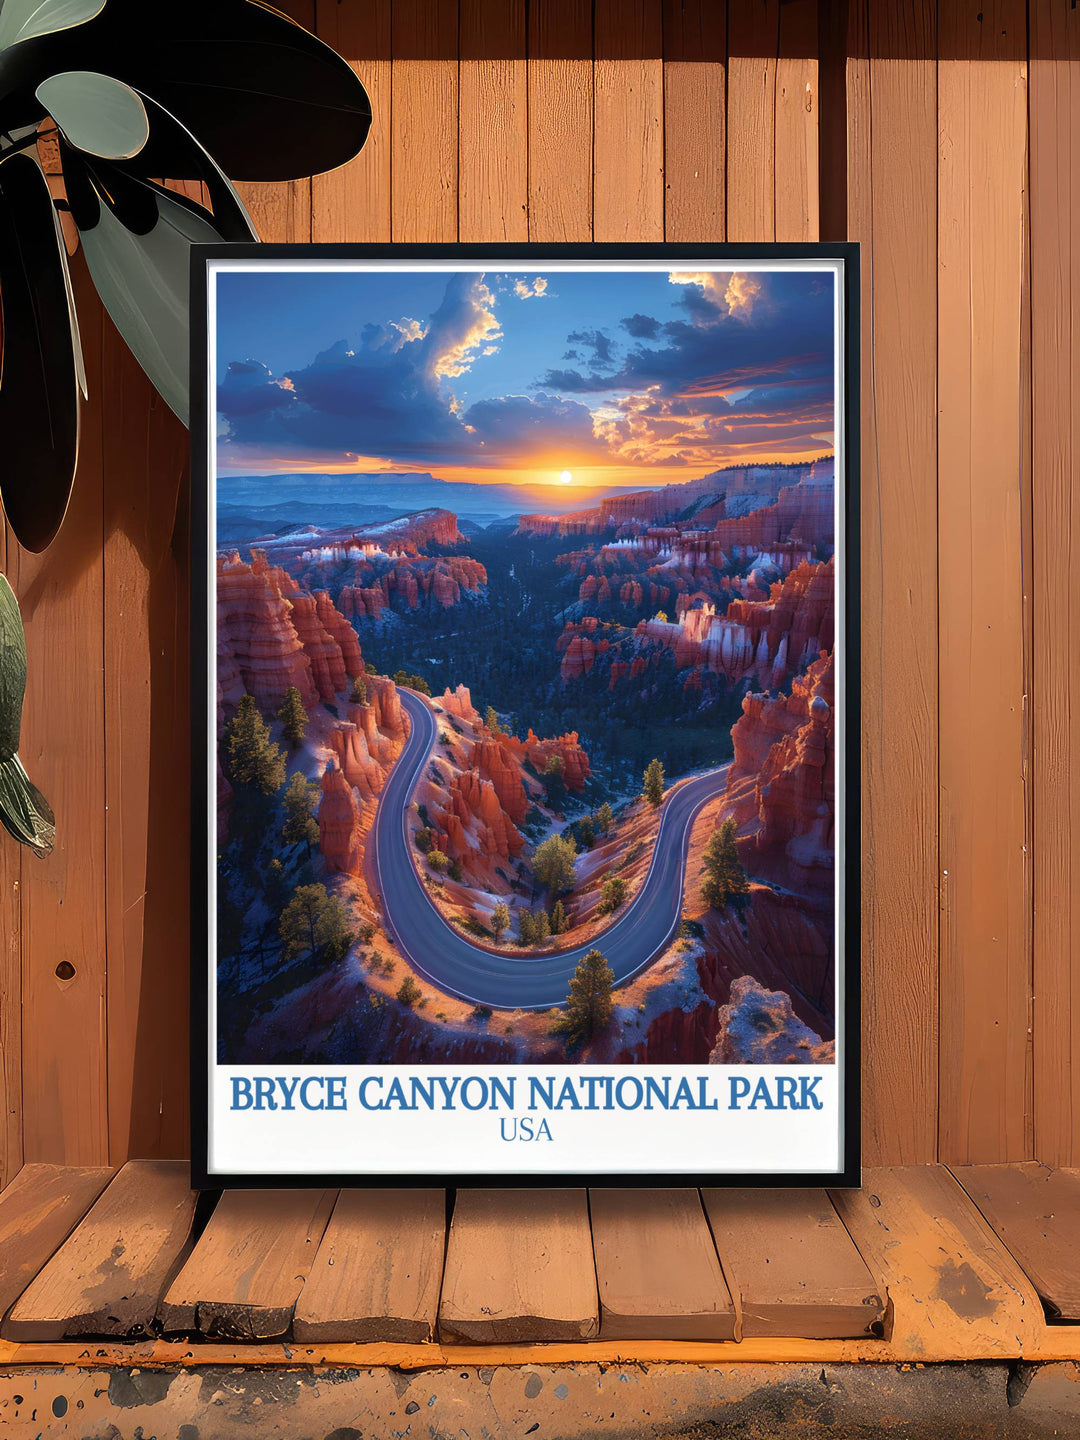 Beautiful Bryce Canyon artwork featuring the majestic views of Sunset Point. Perfect addition to any room in your home. This high quality print is available as a digital download for convenient at home printing.